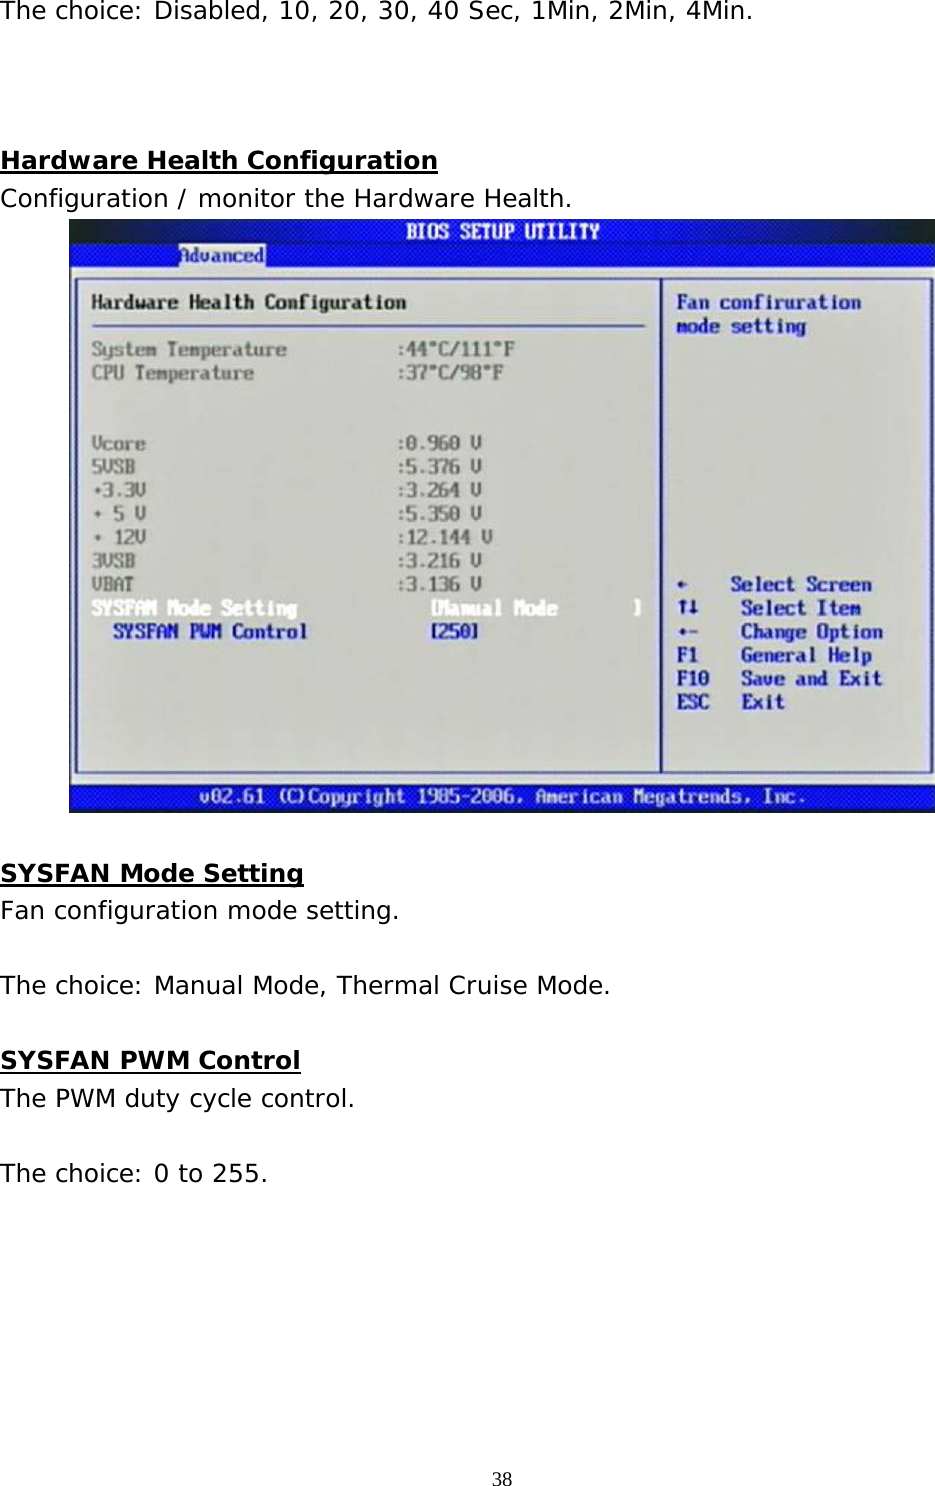  38 The choice: Disabled, 10, 20, 30, 40 Sec, 1Min, 2Min, 4Min.    Hardware Health Configuration Configuration / monitor the Hardware Health.   SYSFAN Mode Setting Fan configuration mode setting.  The choice: Manual Mode, Thermal Cruise Mode.  SYSFAN PWM Control The PWM duty cycle control.  The choice: 0 to 255.       